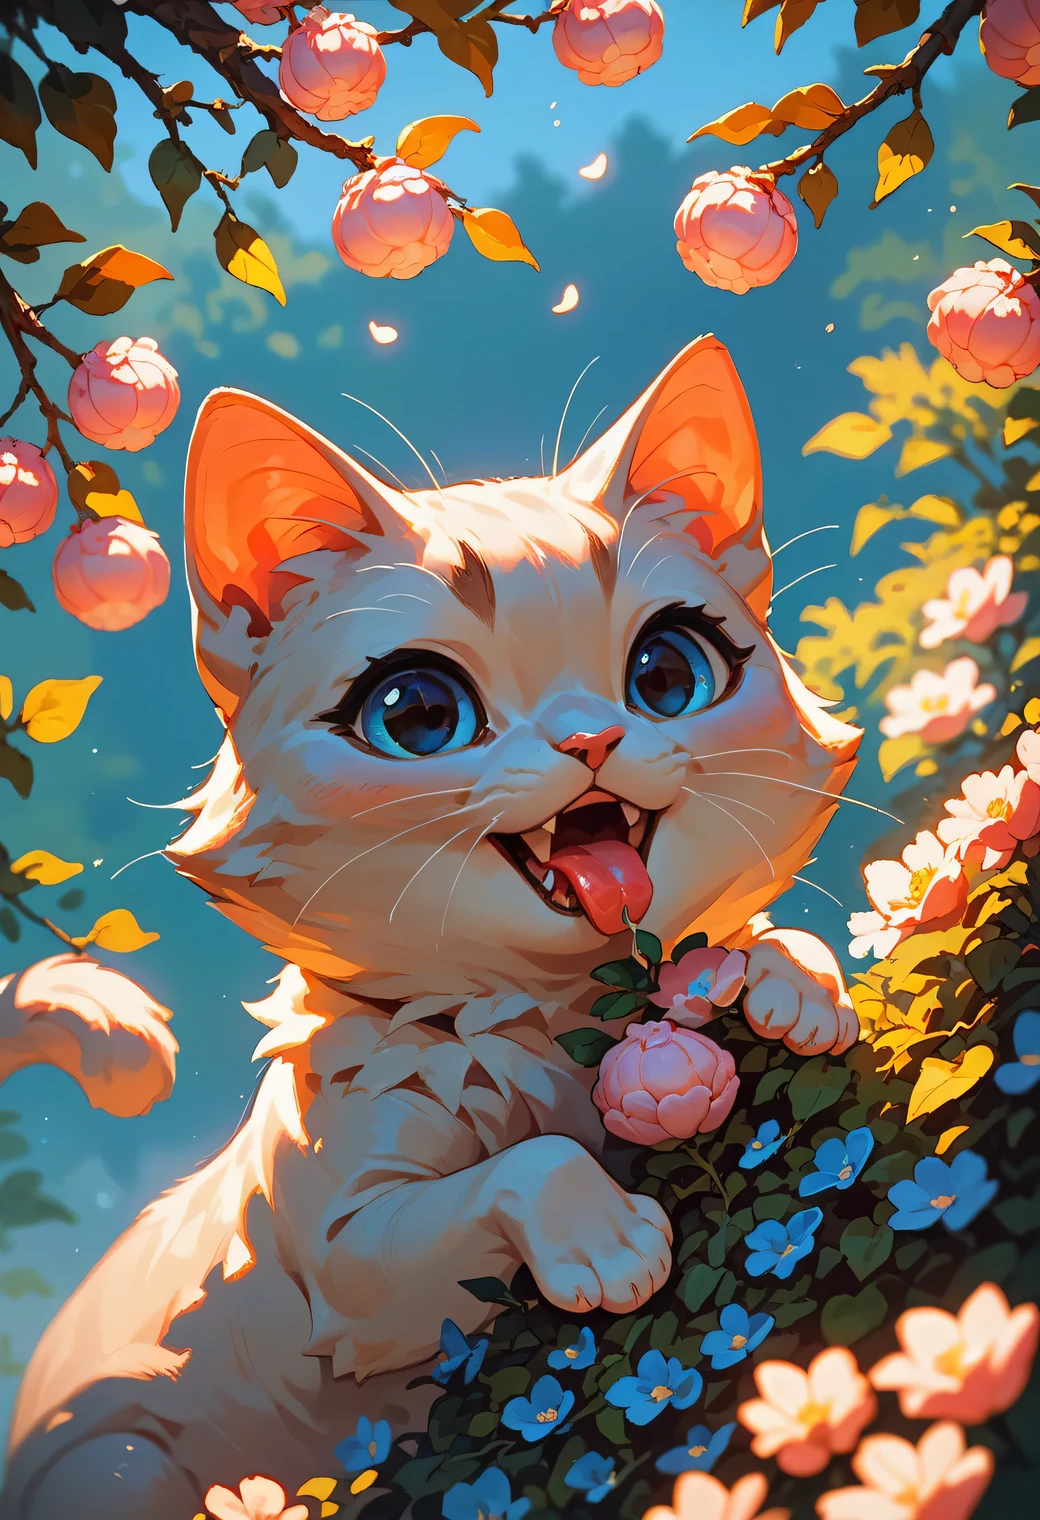 score_9, score_8_up, score_7_up, an adorable cat frolicking, ambient spring, white,blue and pink tetradic colors